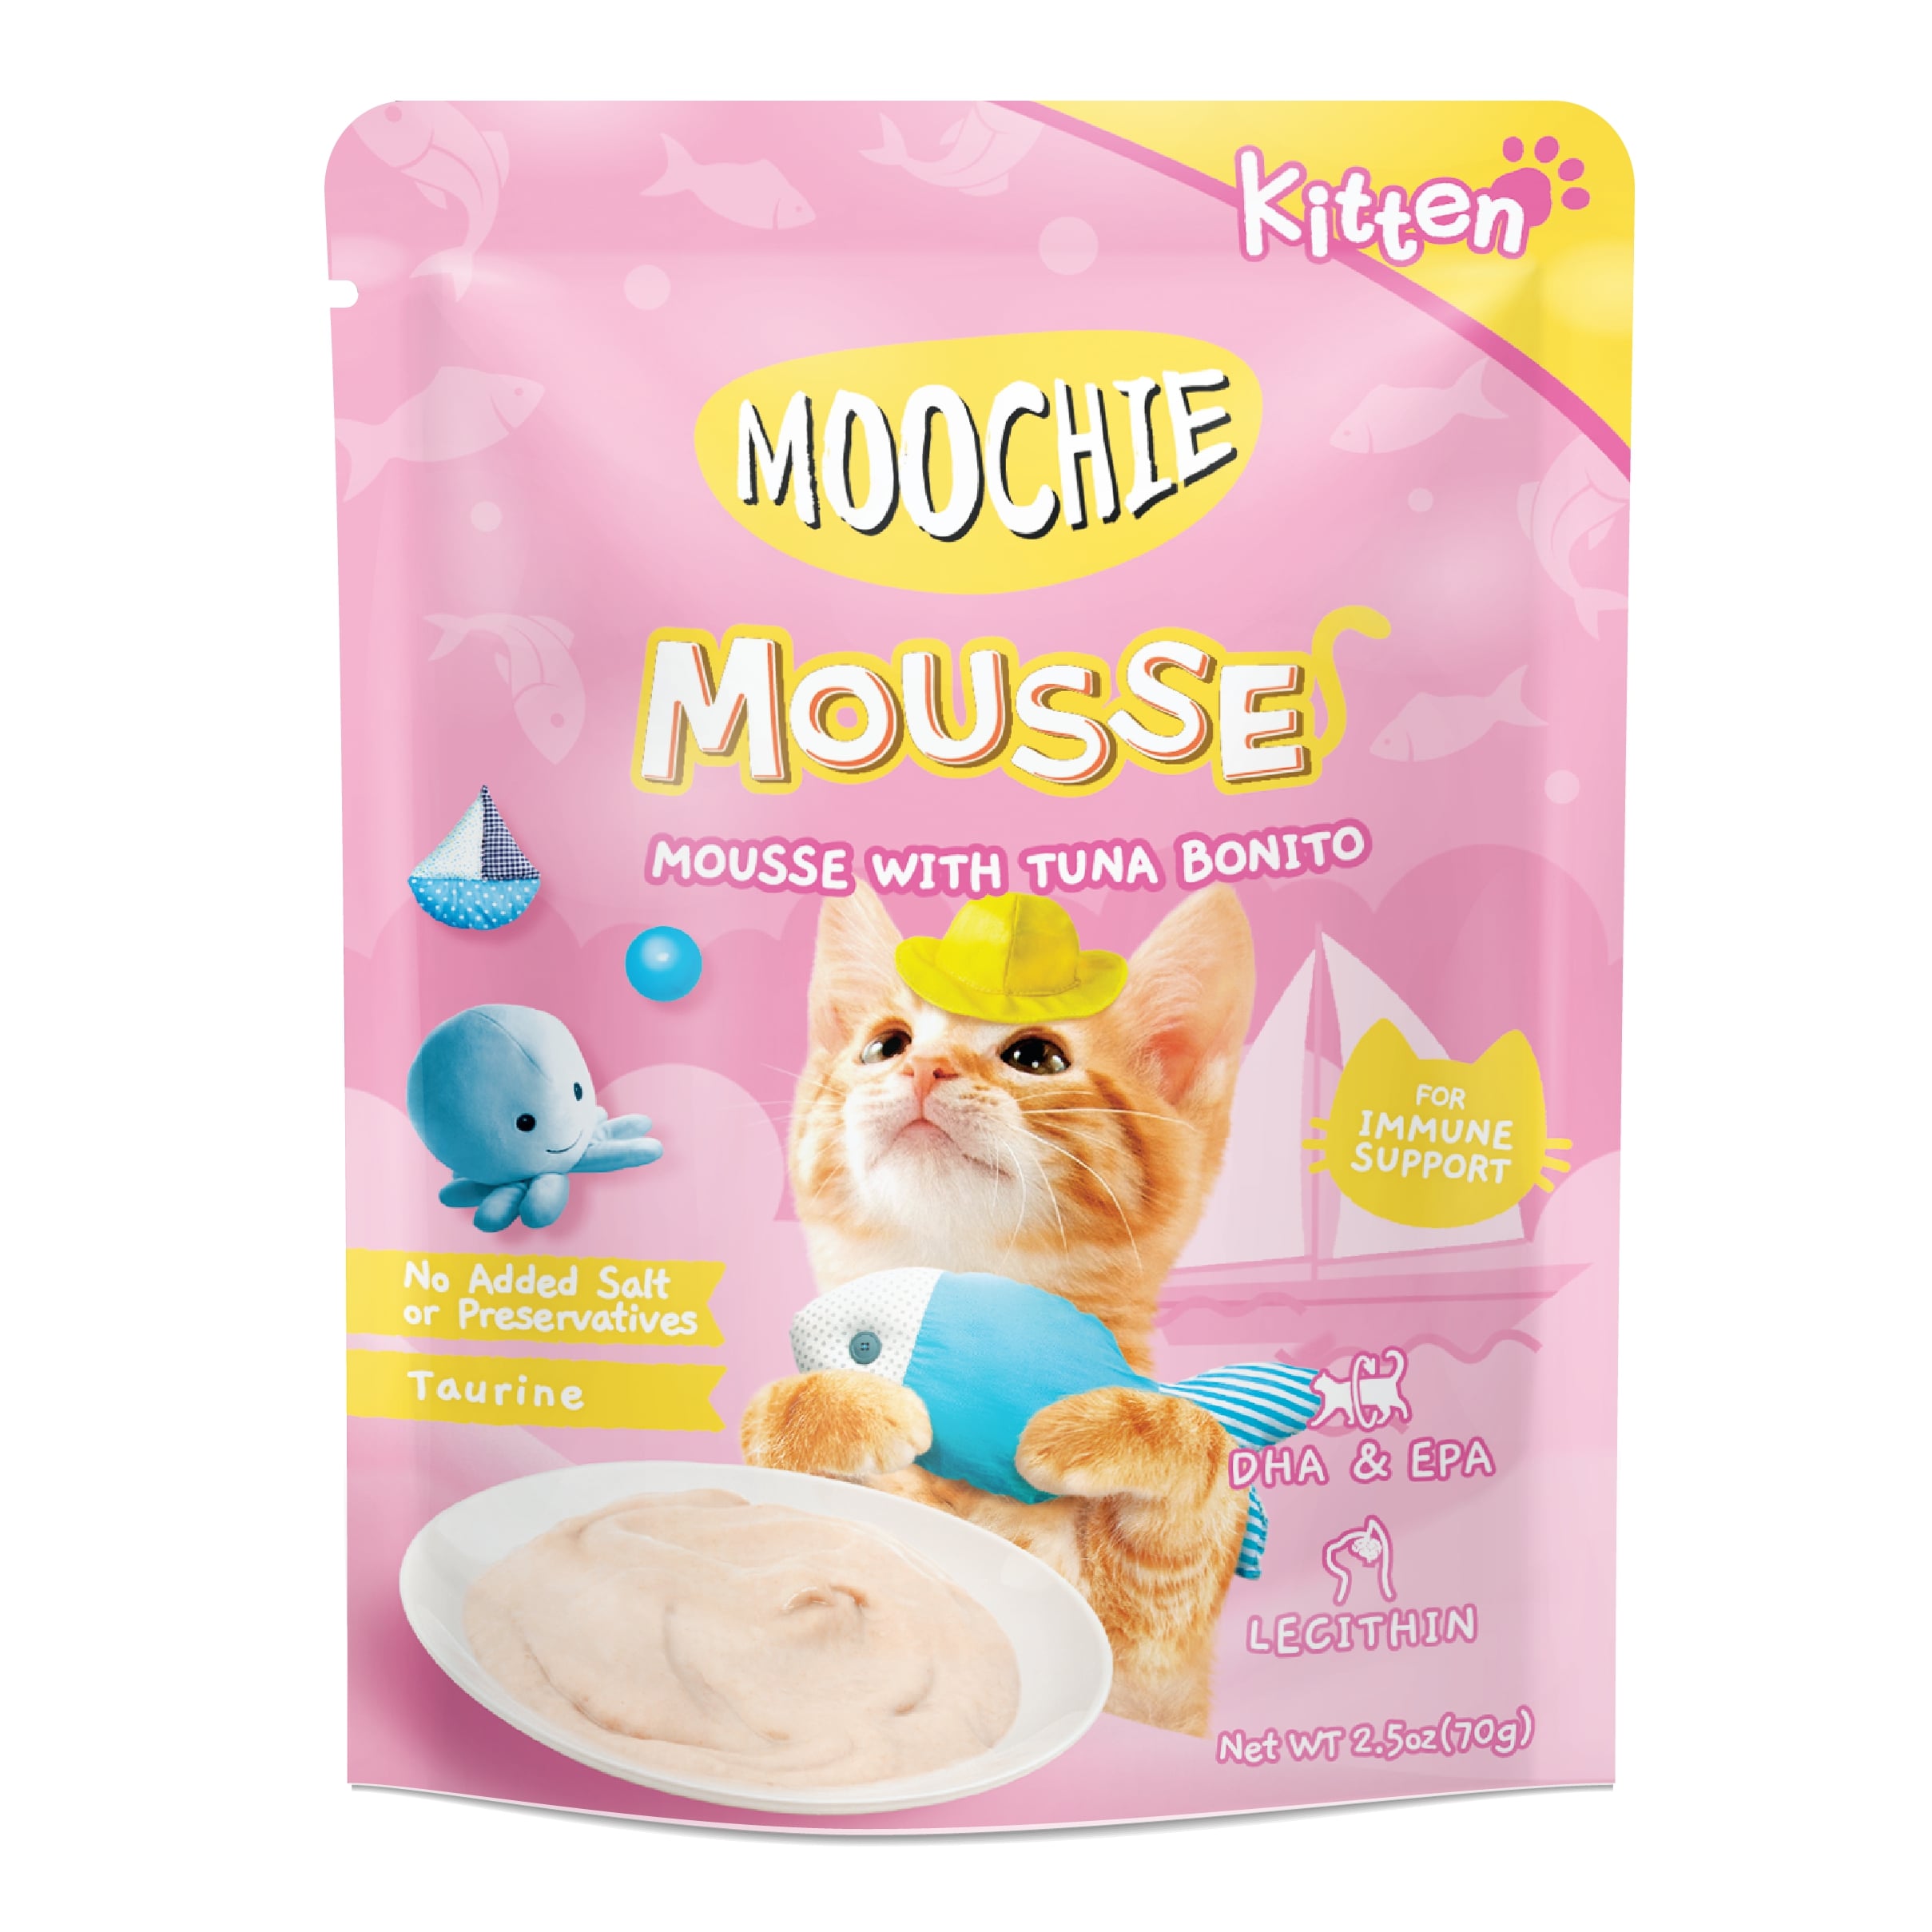 MOOCHIE KITTEN MOUSSE WITH TUNA BONITO 70g Pouch